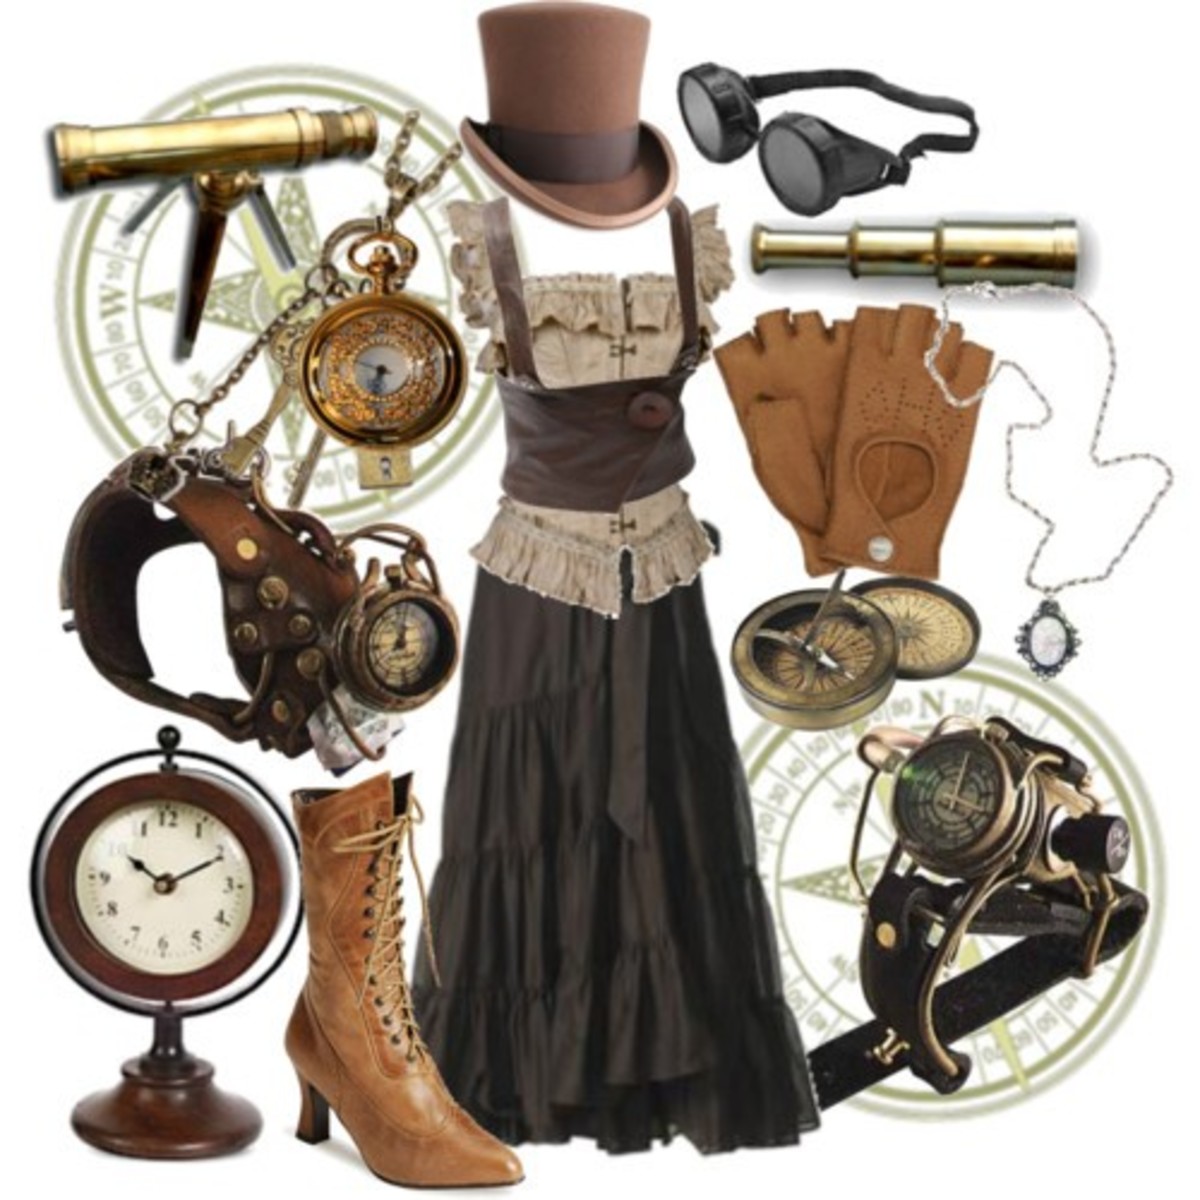 As you can see there are a myriad of ways to add Steampunk to your look from subtle to over the top. Whatever your comfort level,  try a little Steampunk because, afterall fashion is supposed to be fun.